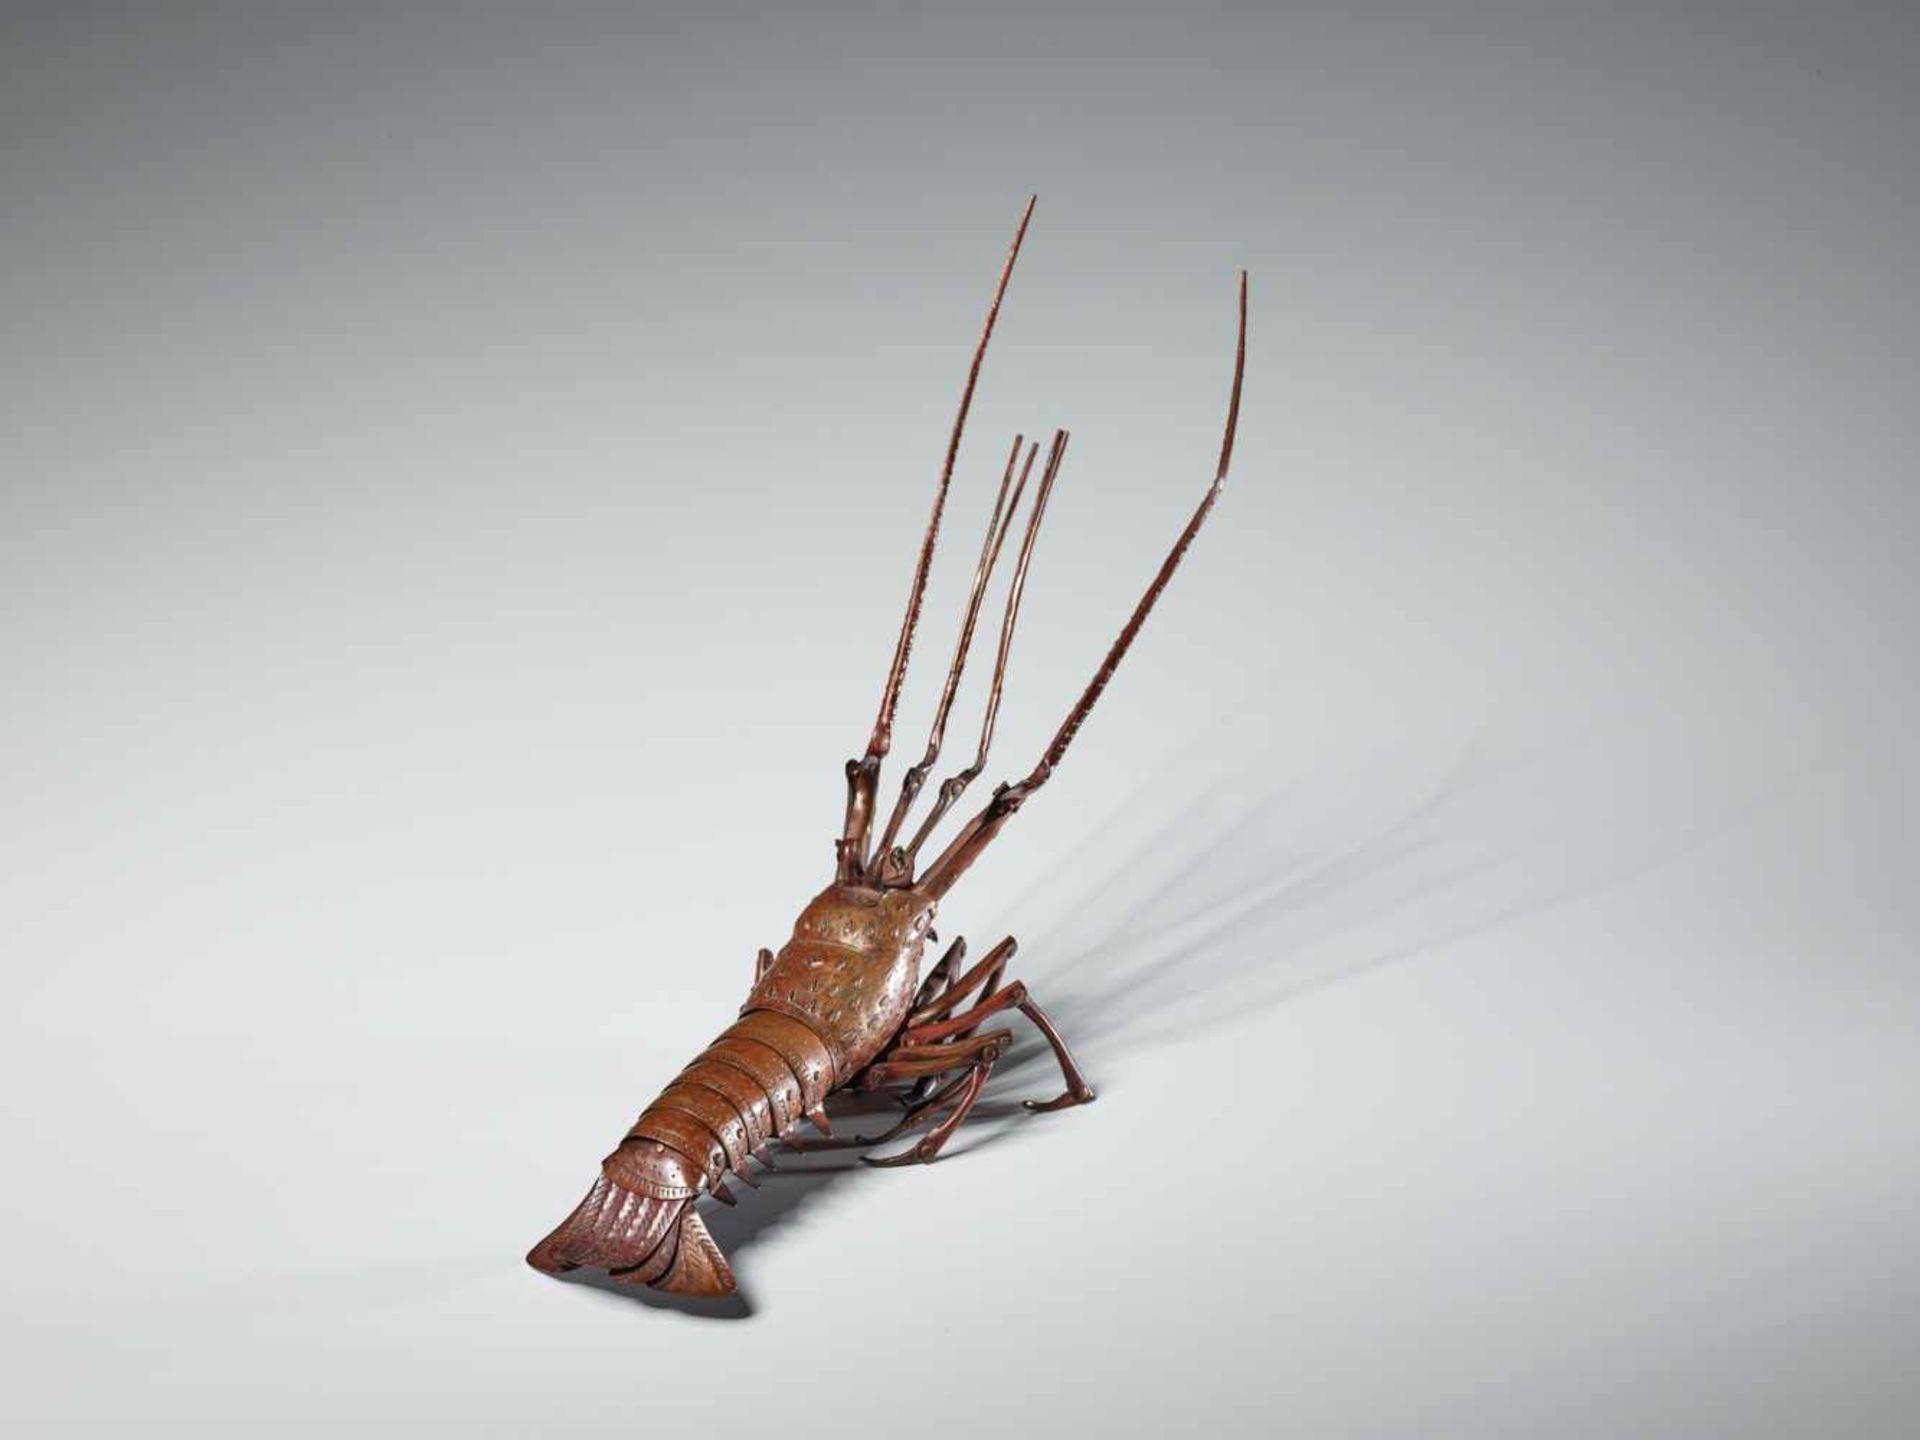 A PAIR OF FULLY ARTICULATED JIZAI OKIMONO DEPICTING EBI (SPINY LOBSTER) BY HIROYOSHICopperJapan, - Image 8 of 15